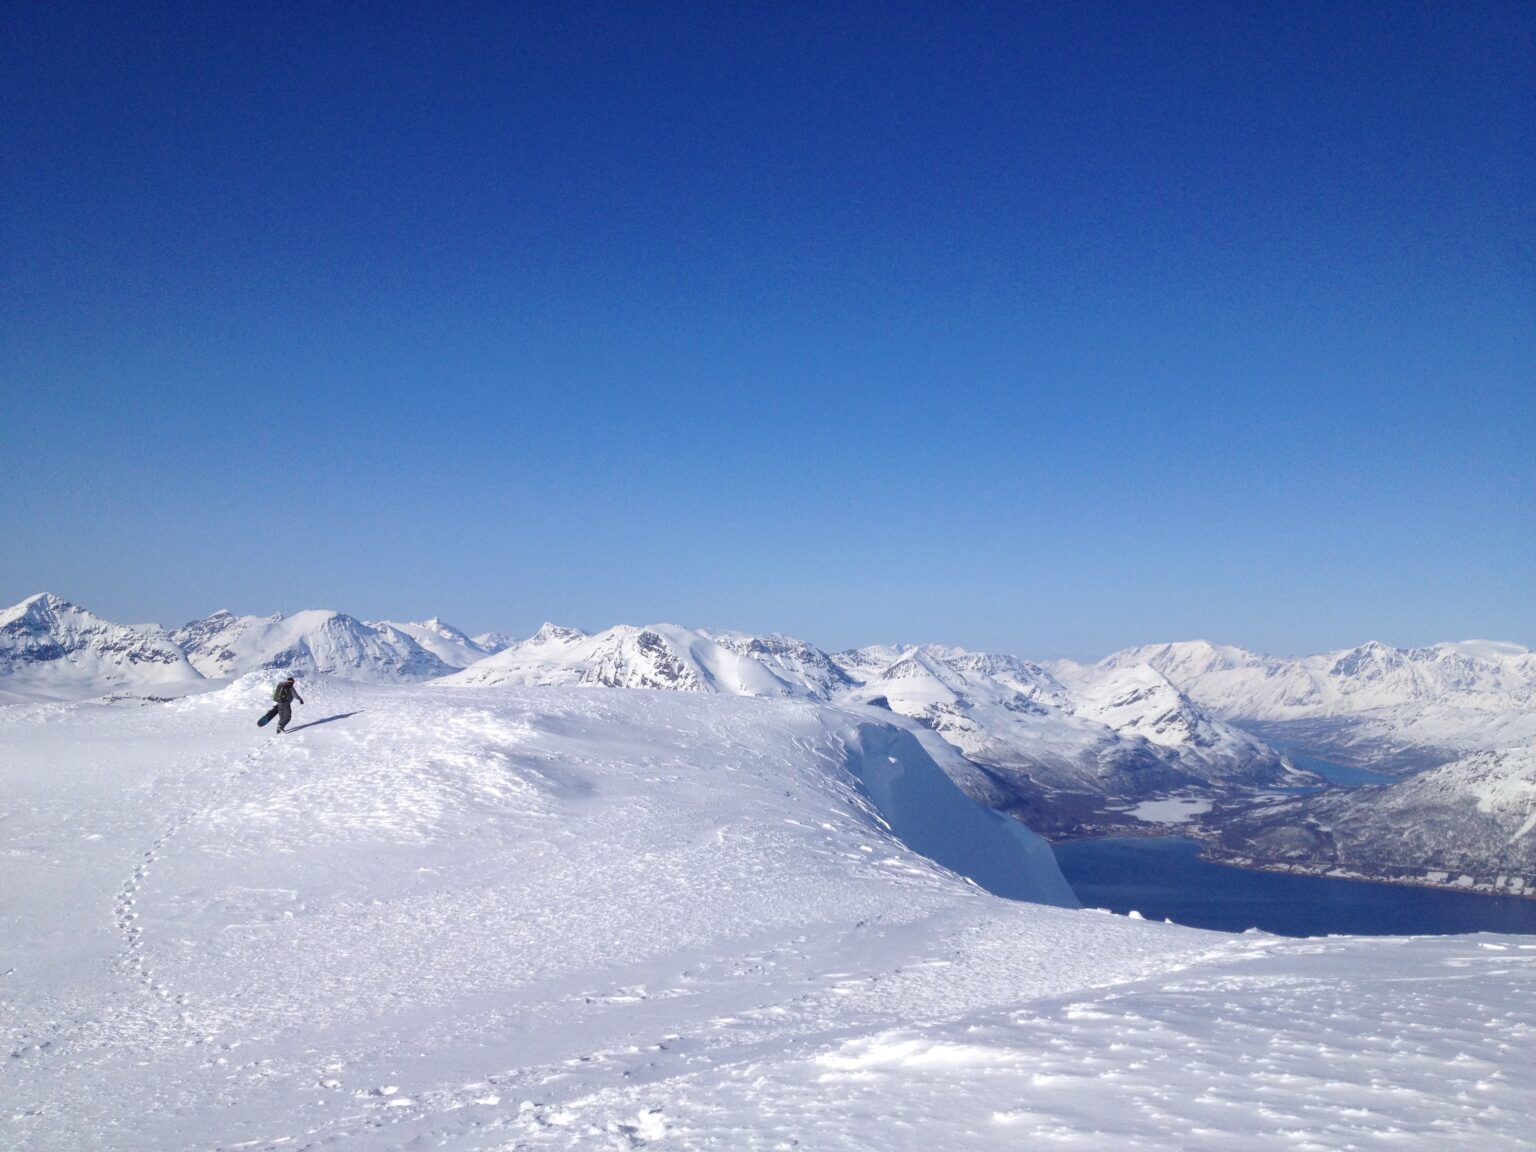 Hiking to the summit of Haugafjellet in the Tromsø area